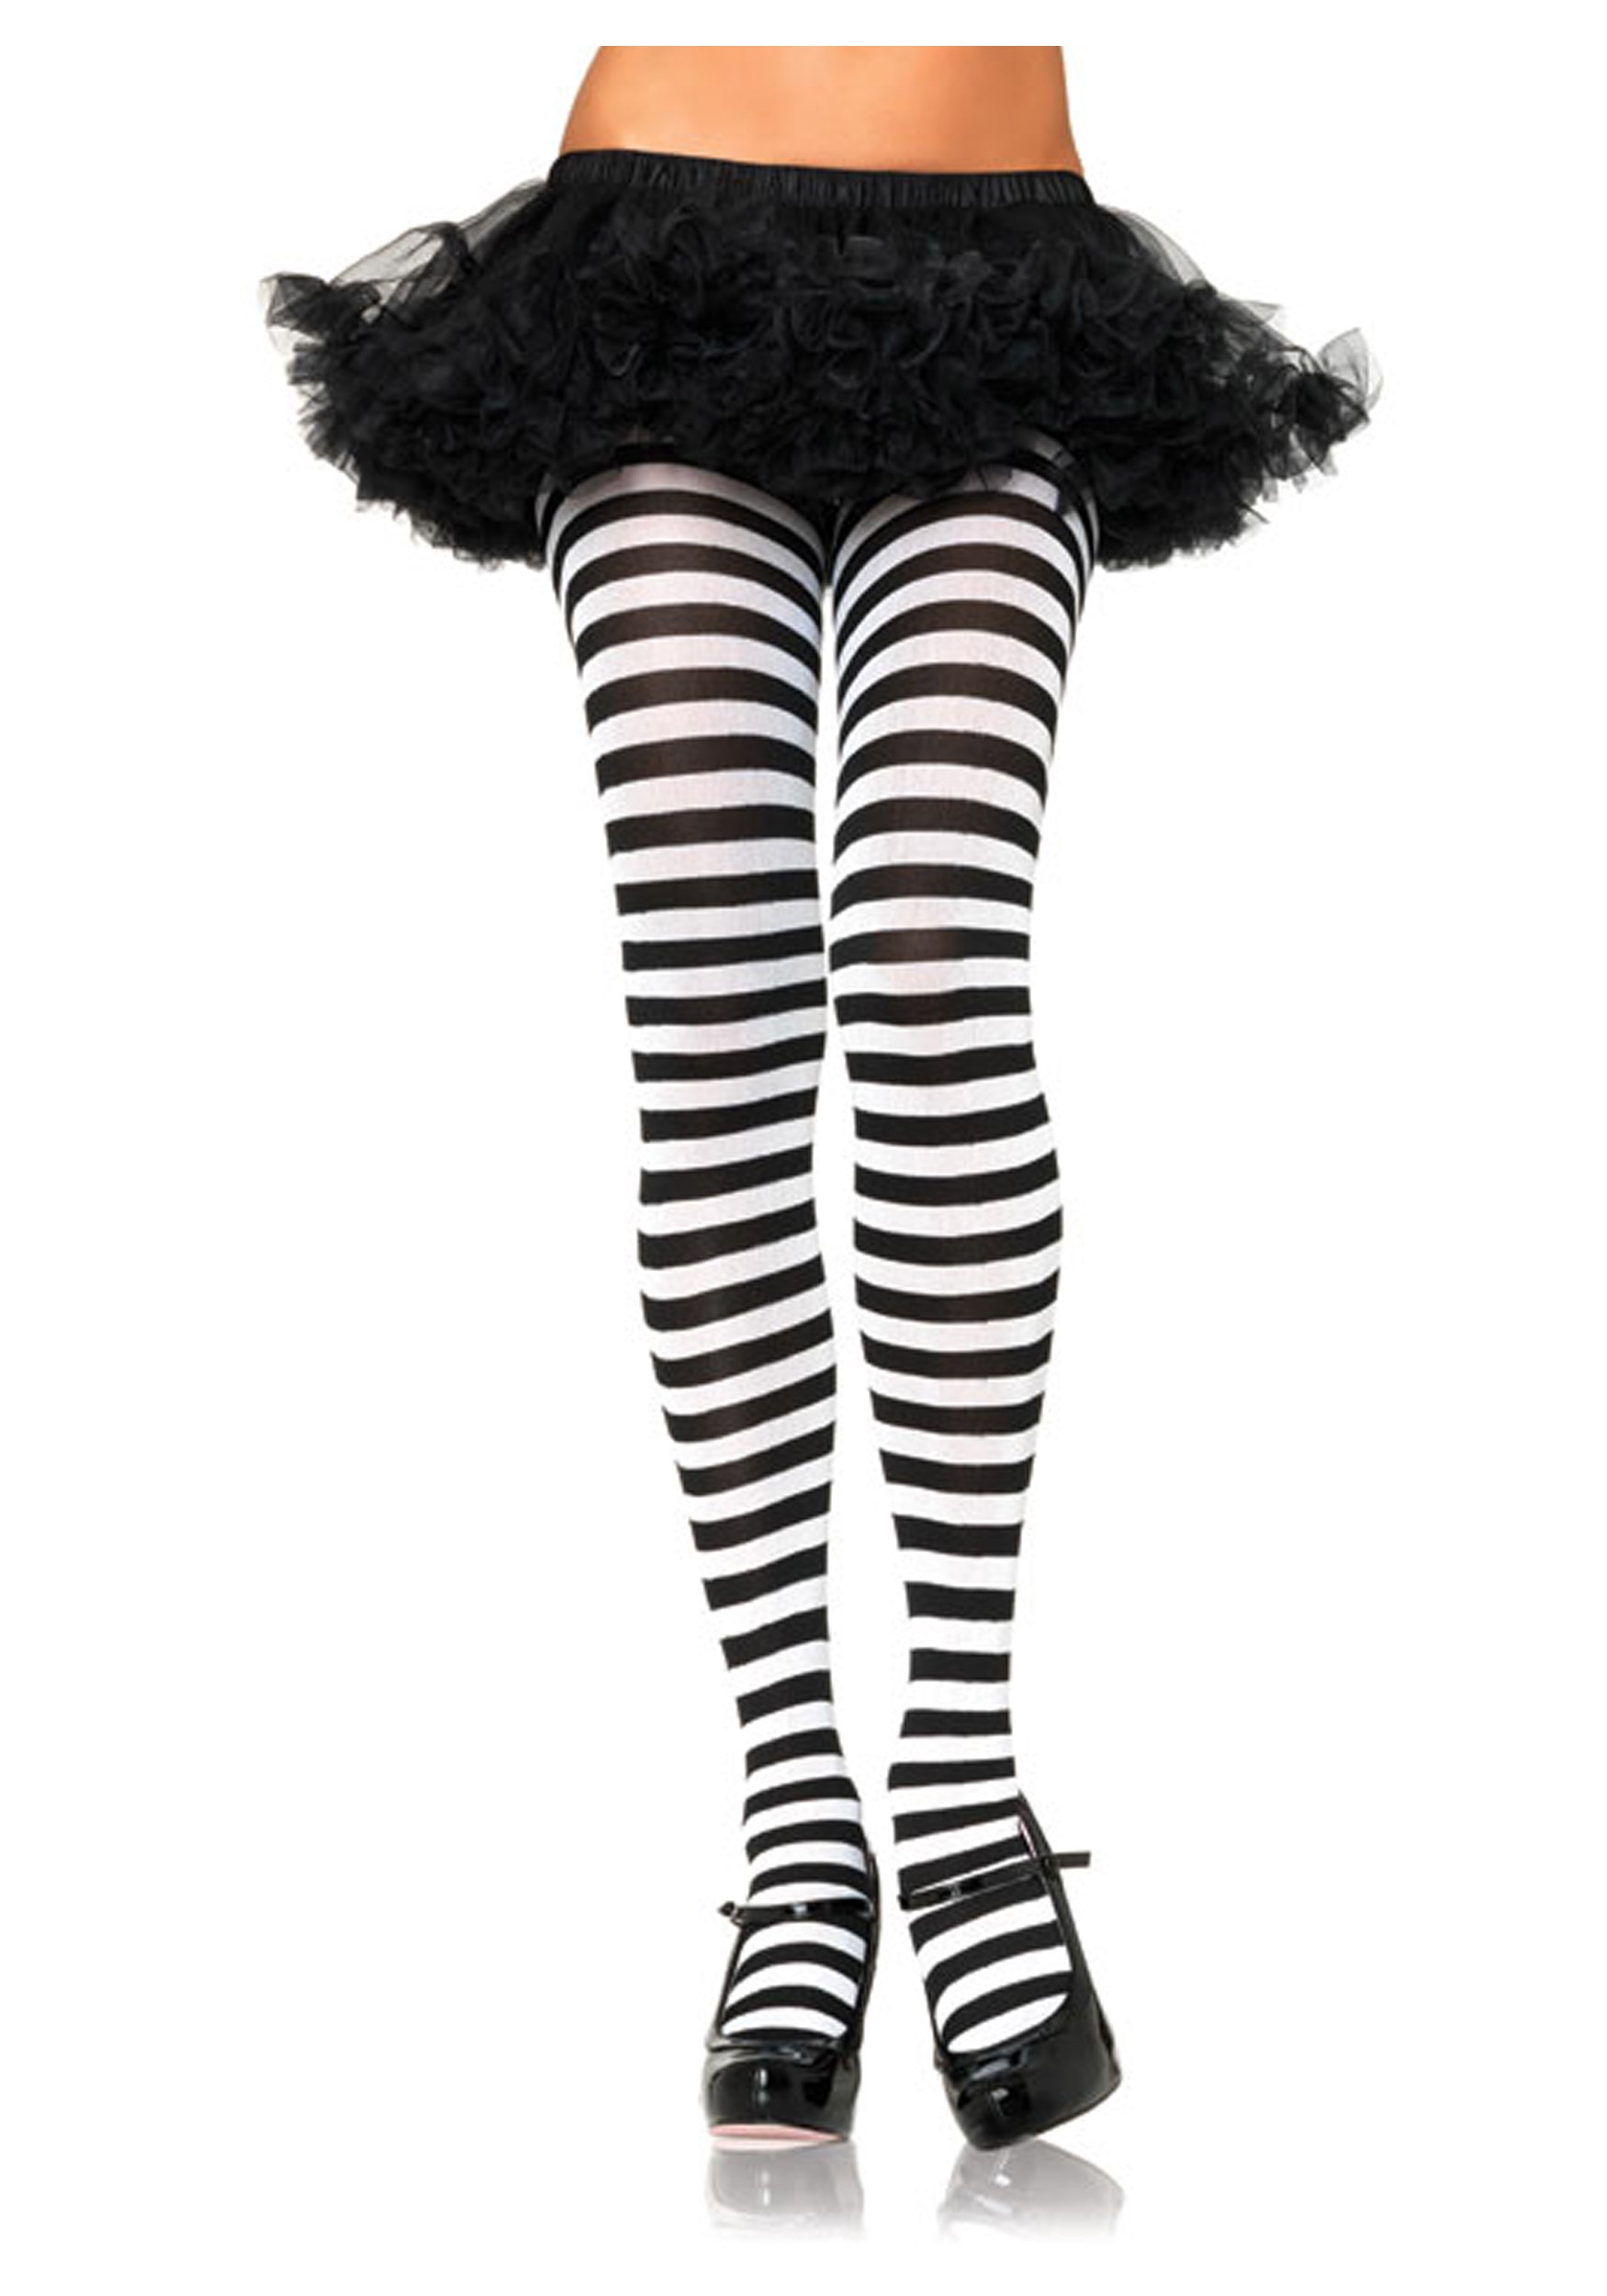 Black and White Striped Plus Size Tights | Plus Size Tights